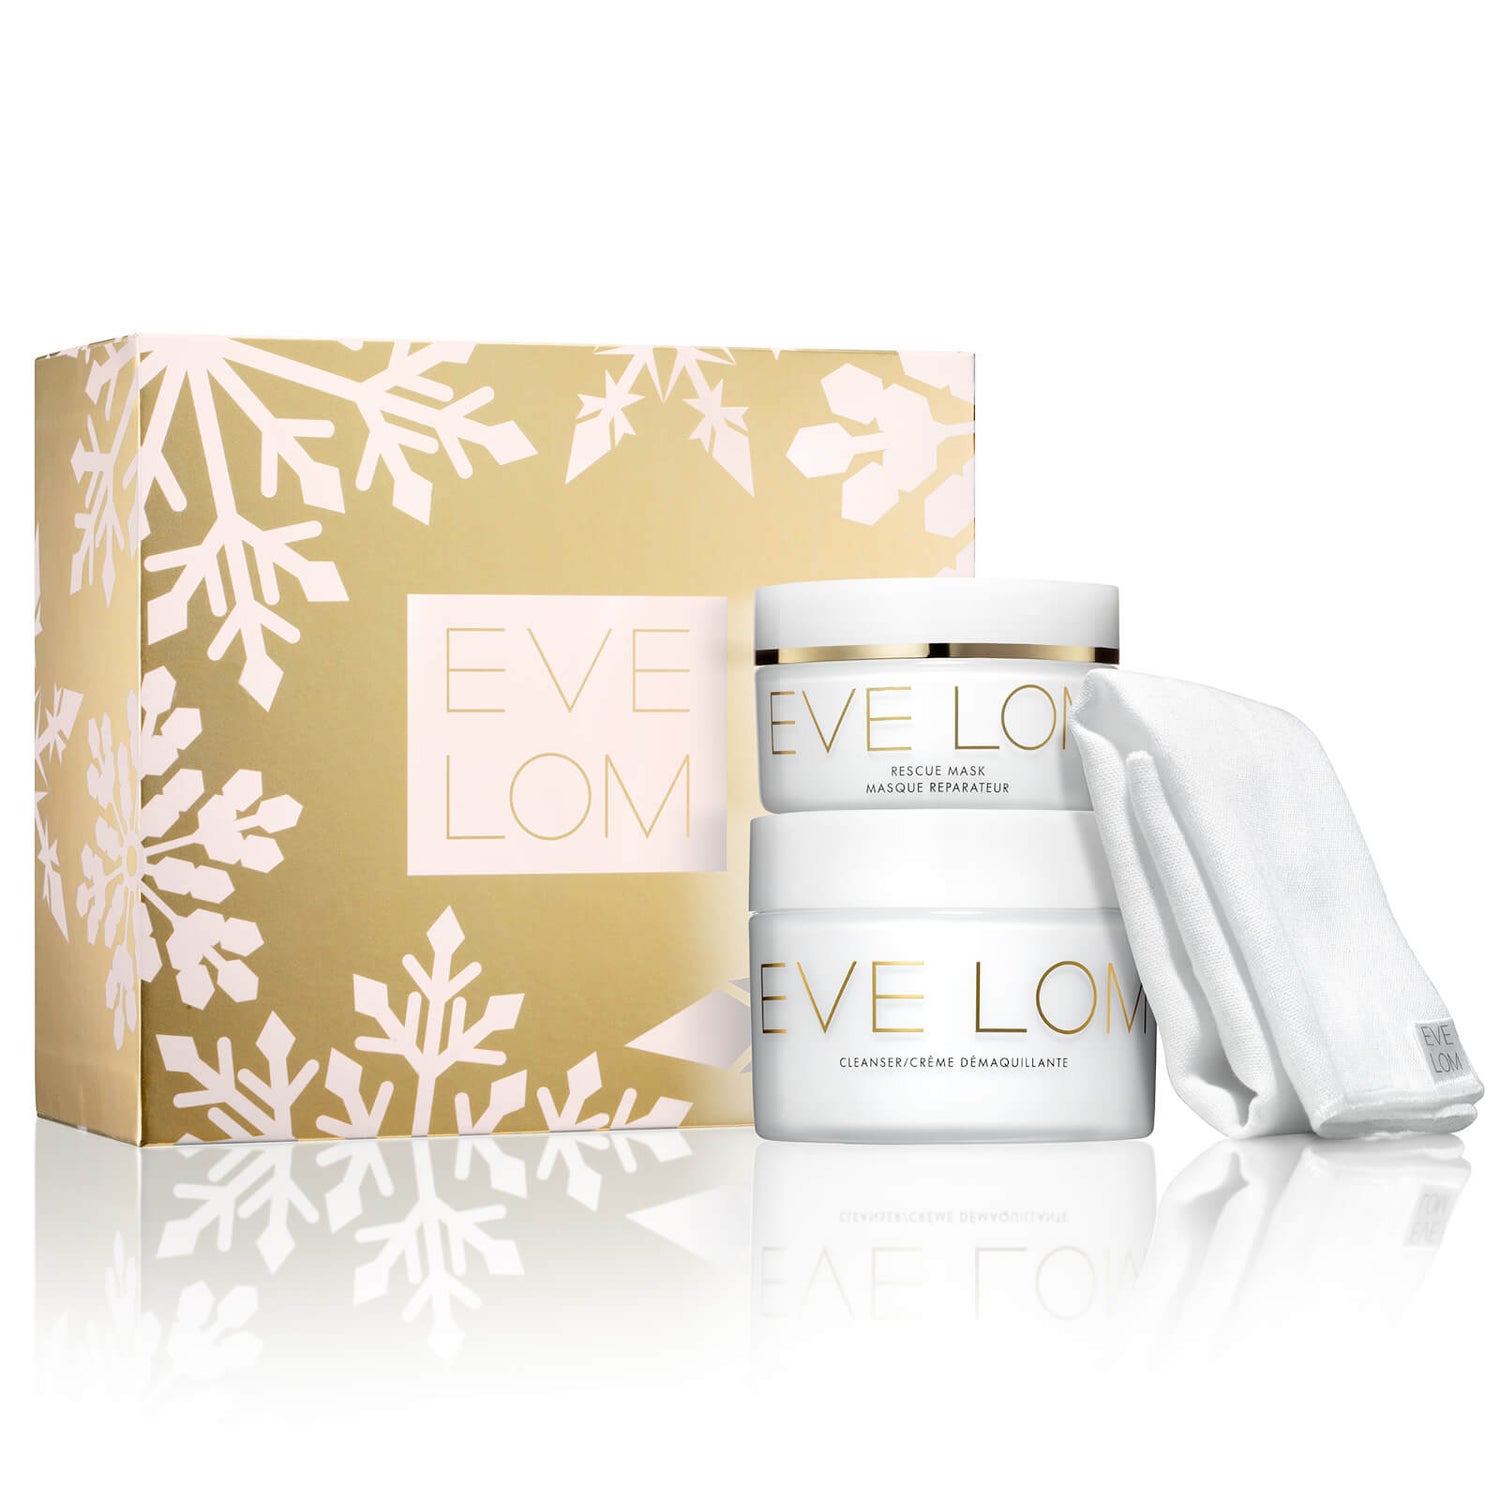 Eve Lom Deluxe Rescue Ritual Gift Set (Worth $232.00) - Exclusive